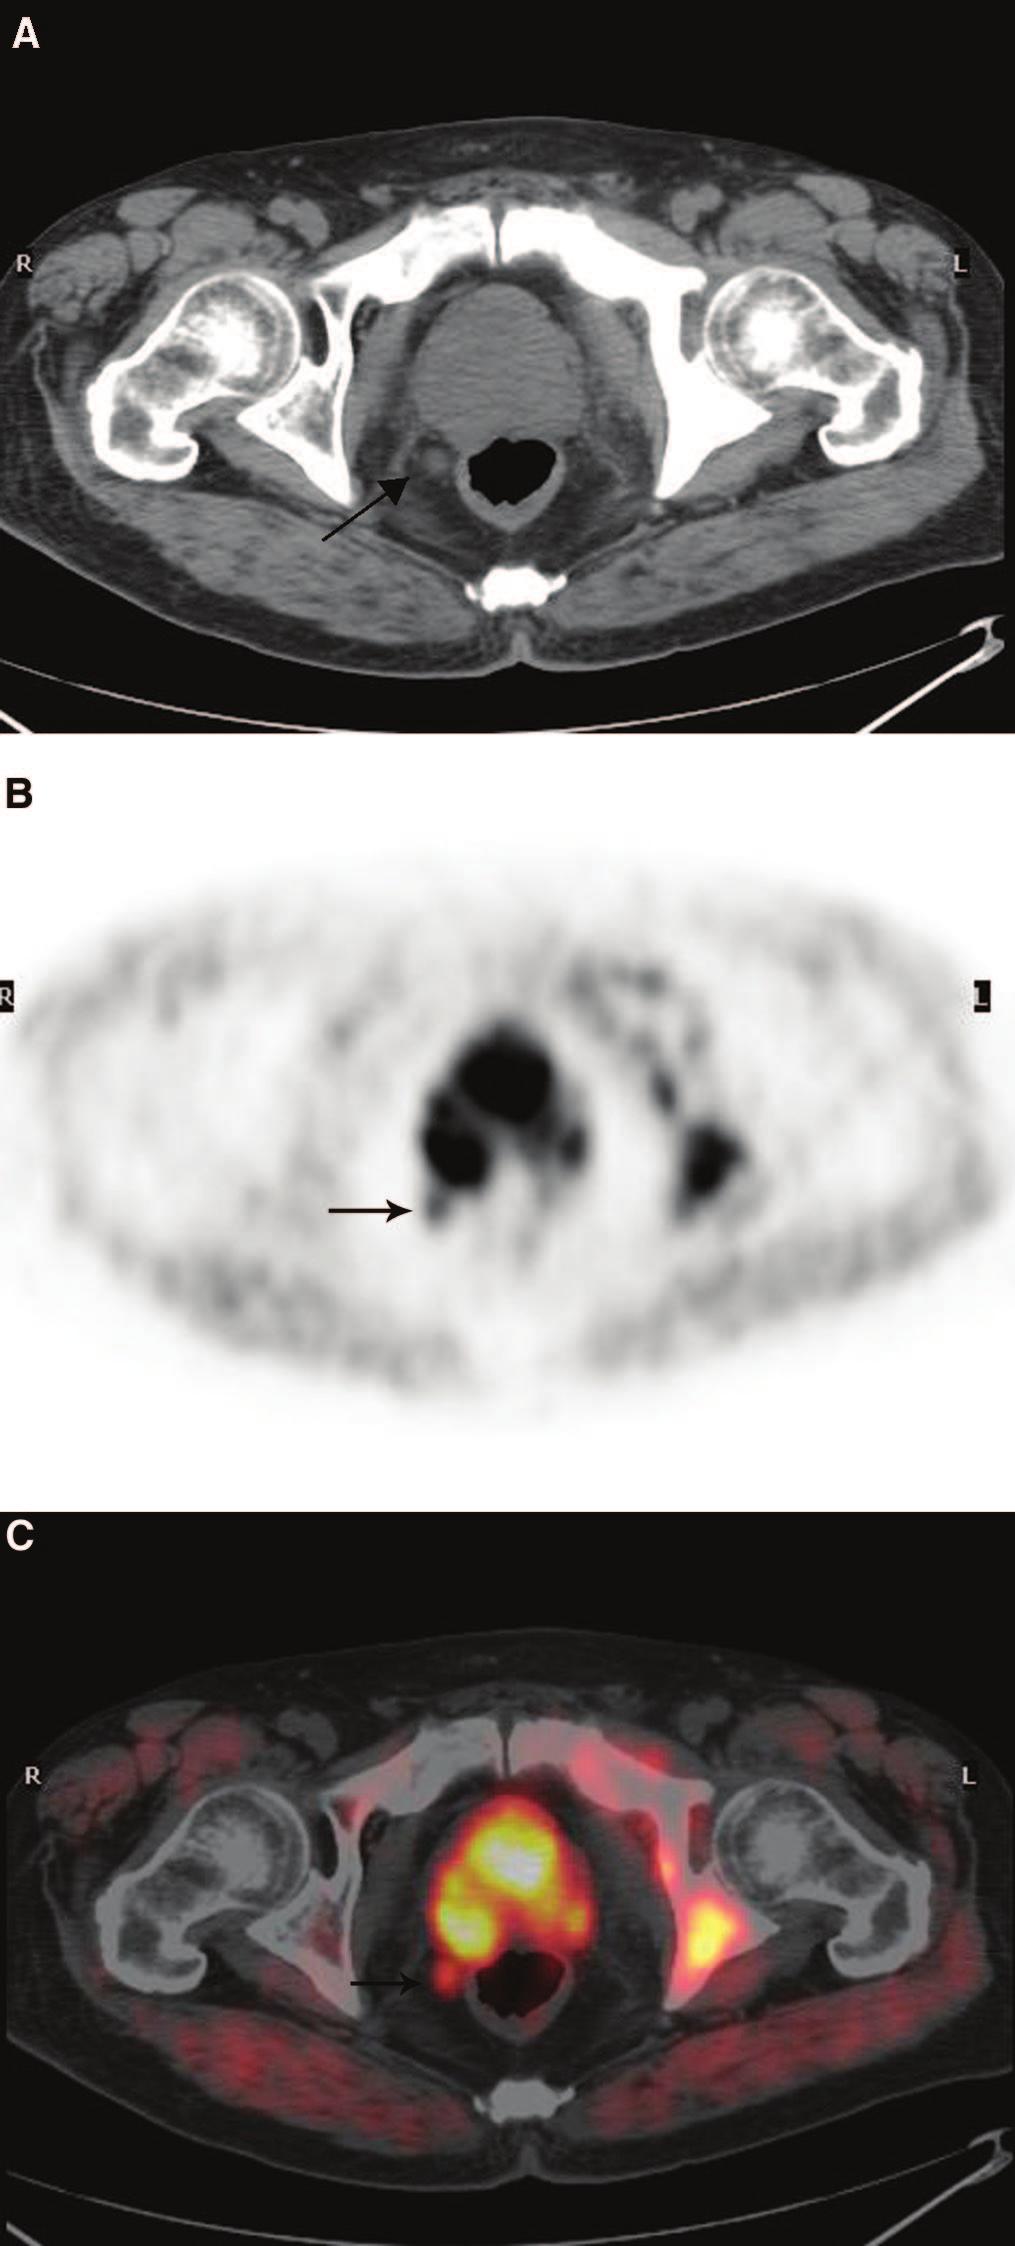 PET/CT image (C) shows symmetrical accumulation of radioactivity within the central zone of prostate. 674 FIGURE 4.